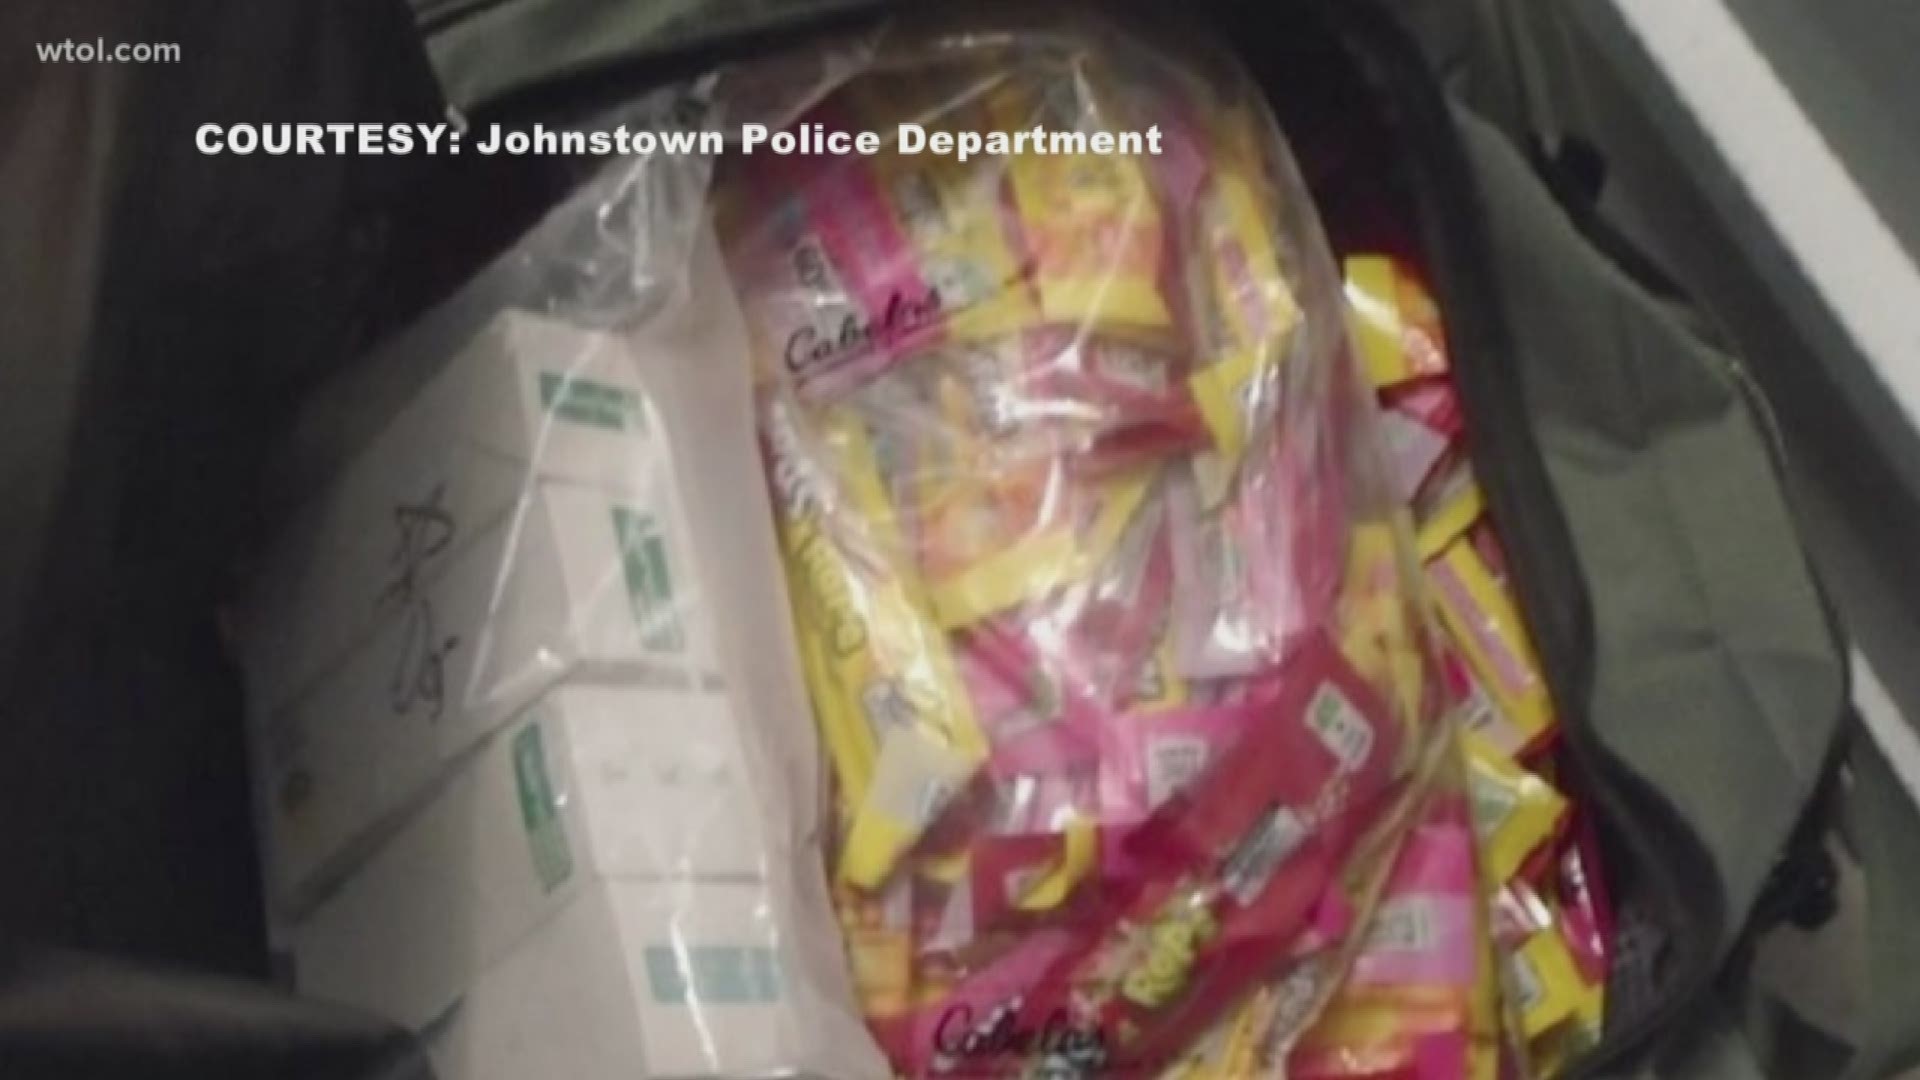 Candy was found during a bust in Pennsylvania and police want parents to be on the lookout for similar candy during Halloween.